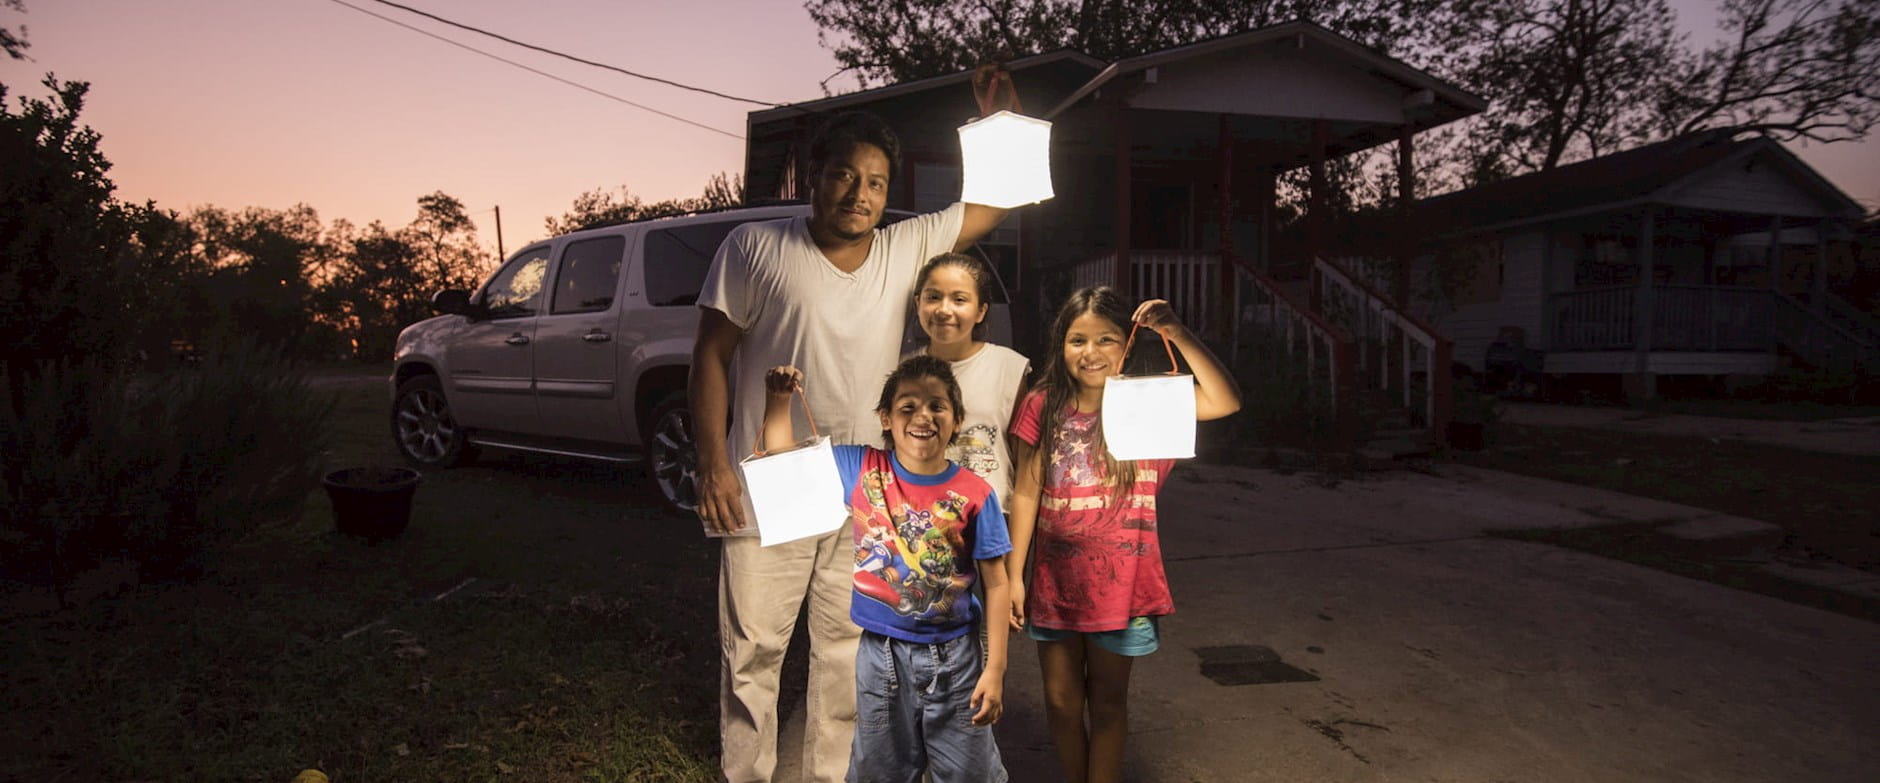 This is an image of a family in Houston using a LuminAID lantern